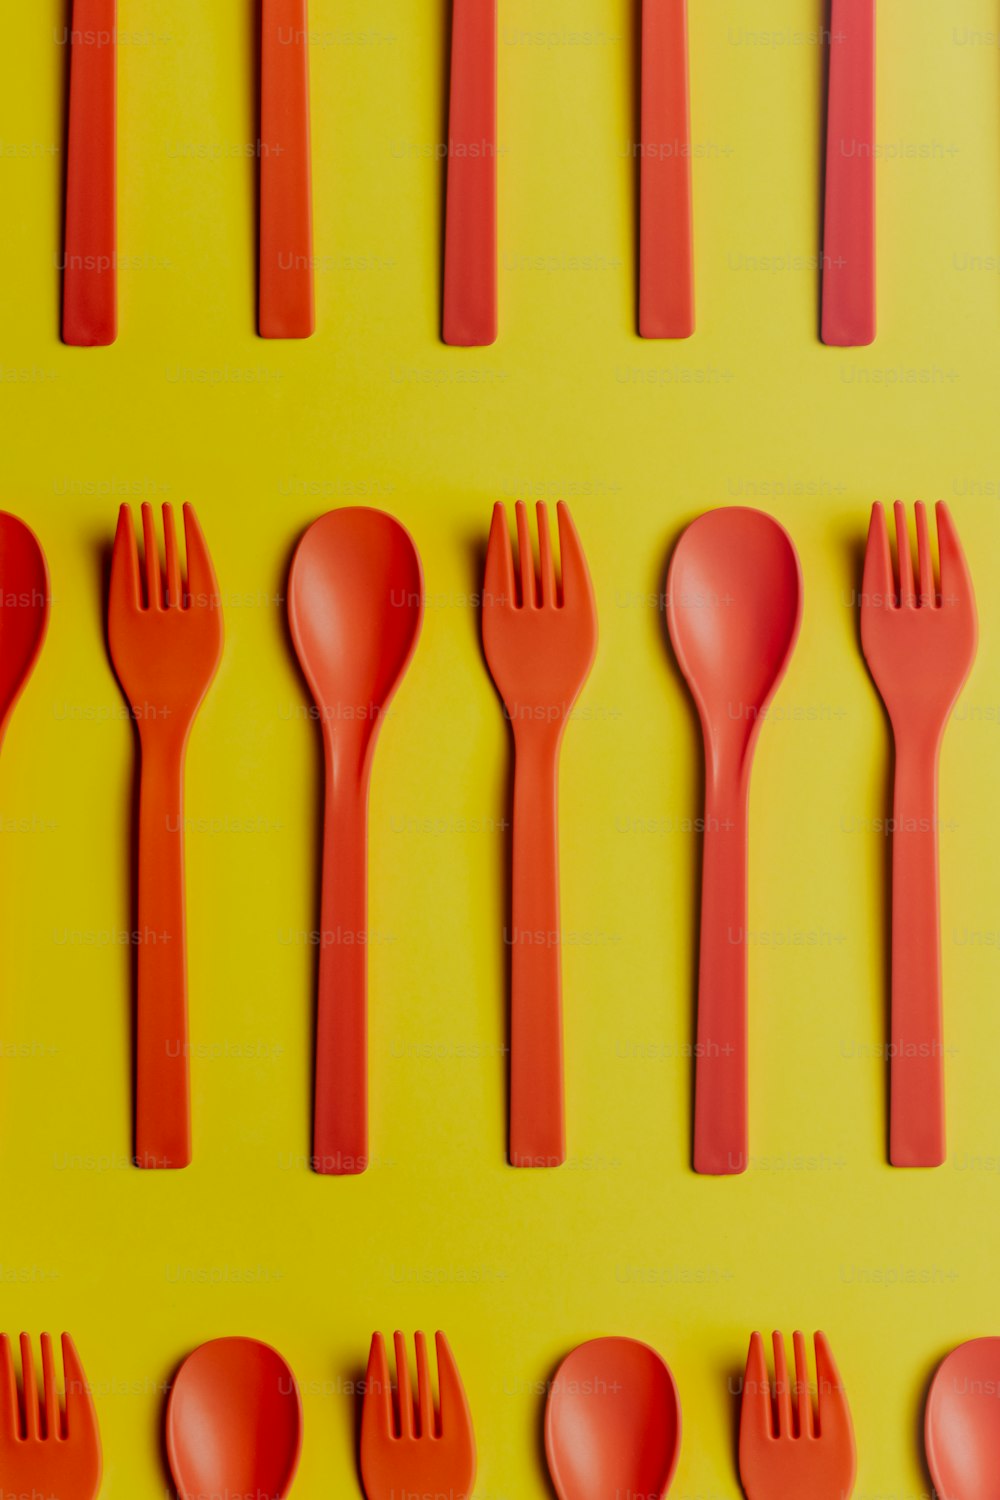 a group of red forks and spoons on a yellow background